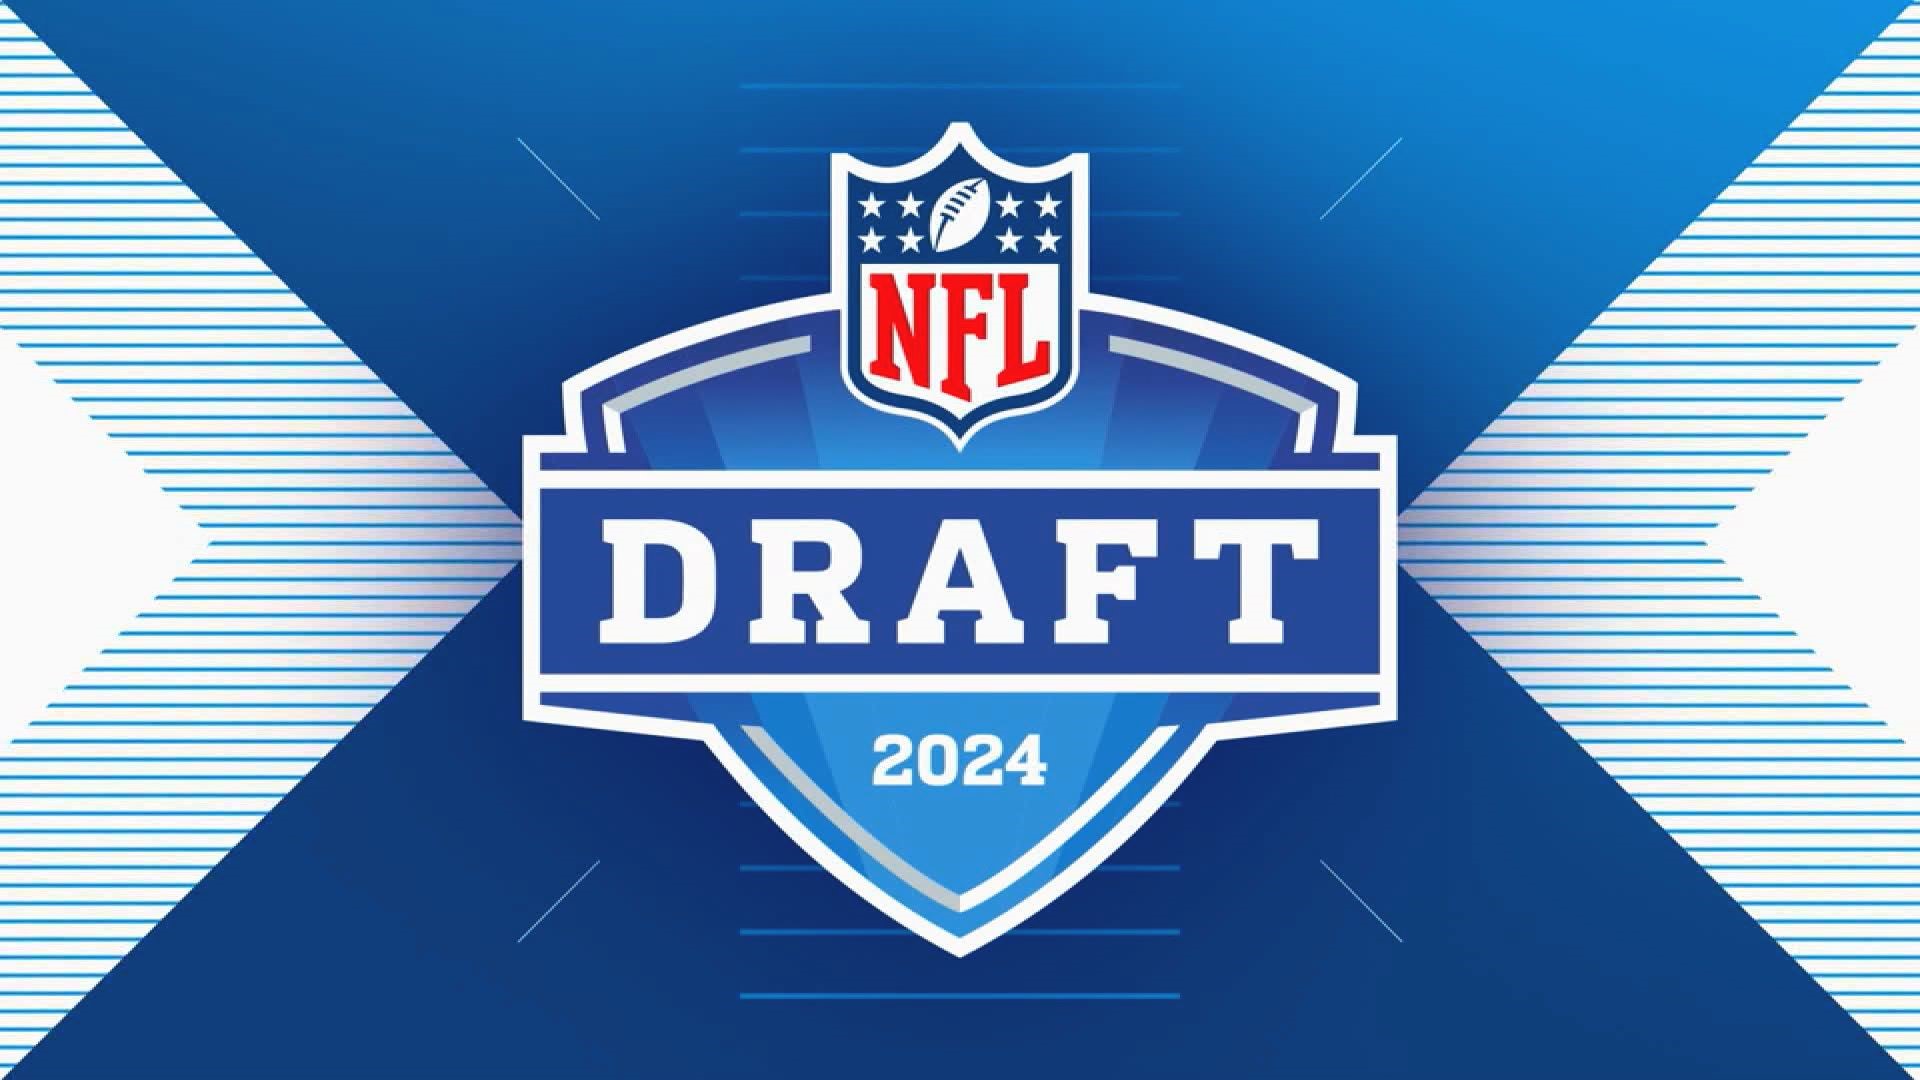 Downtown Detroit will be taken over by the NFL Draft from April 25 through April 27.